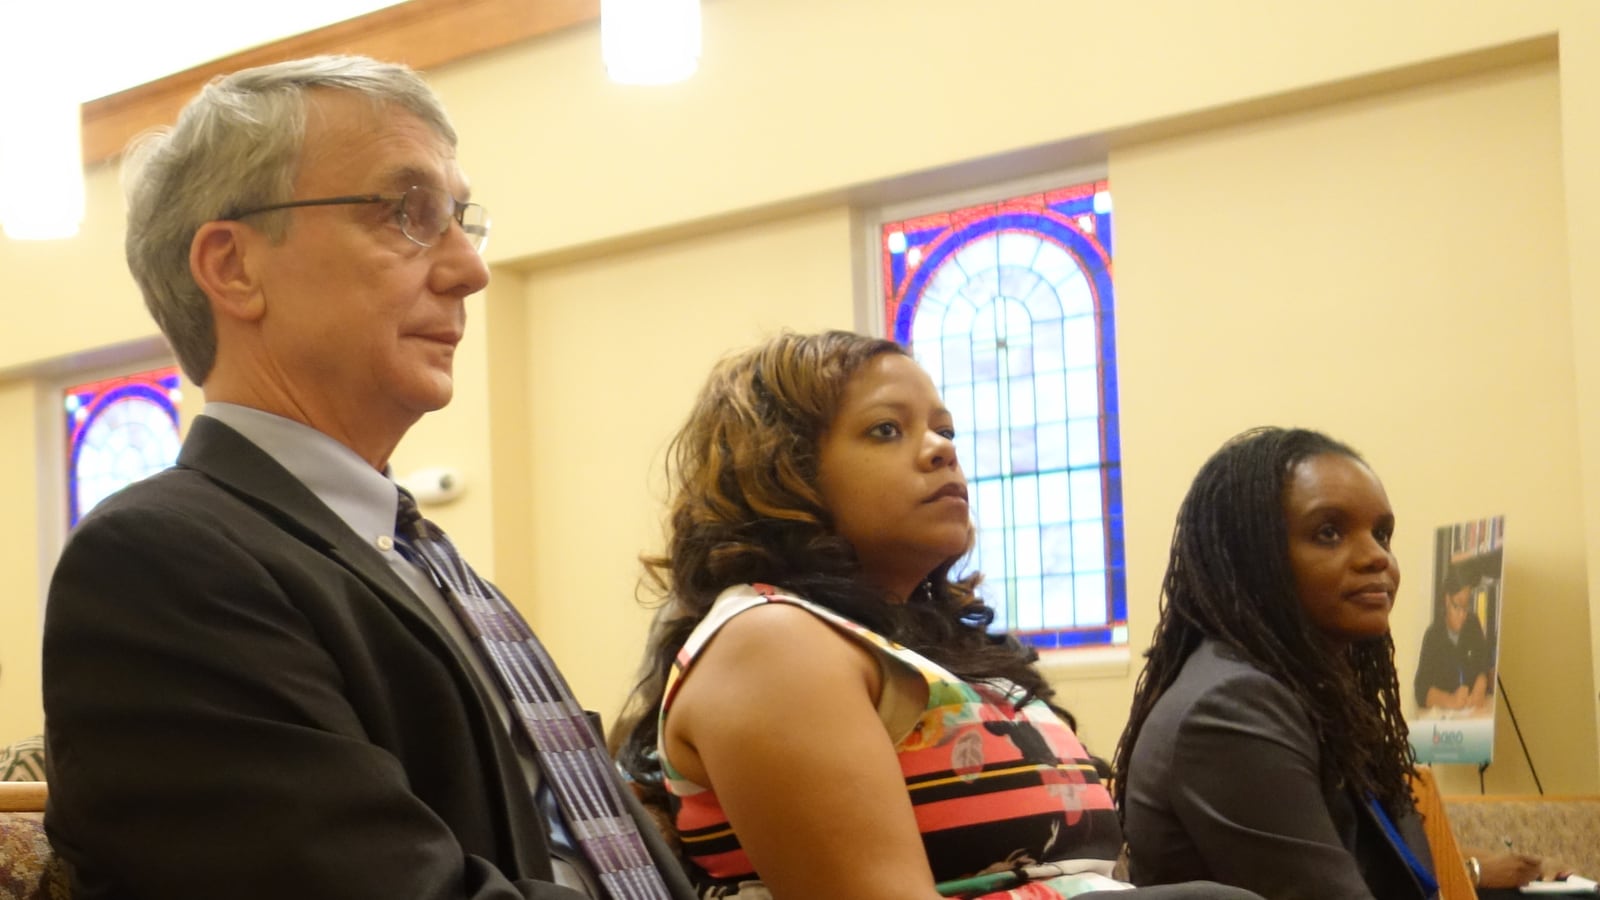 Chris Caldwell (left) and Roshun Austin (right) listen in at community forum for Shelby County Schools candidates on July 14. Many of the same business leaders have donated to their two campaigns, totaling nearly $20,000 each.